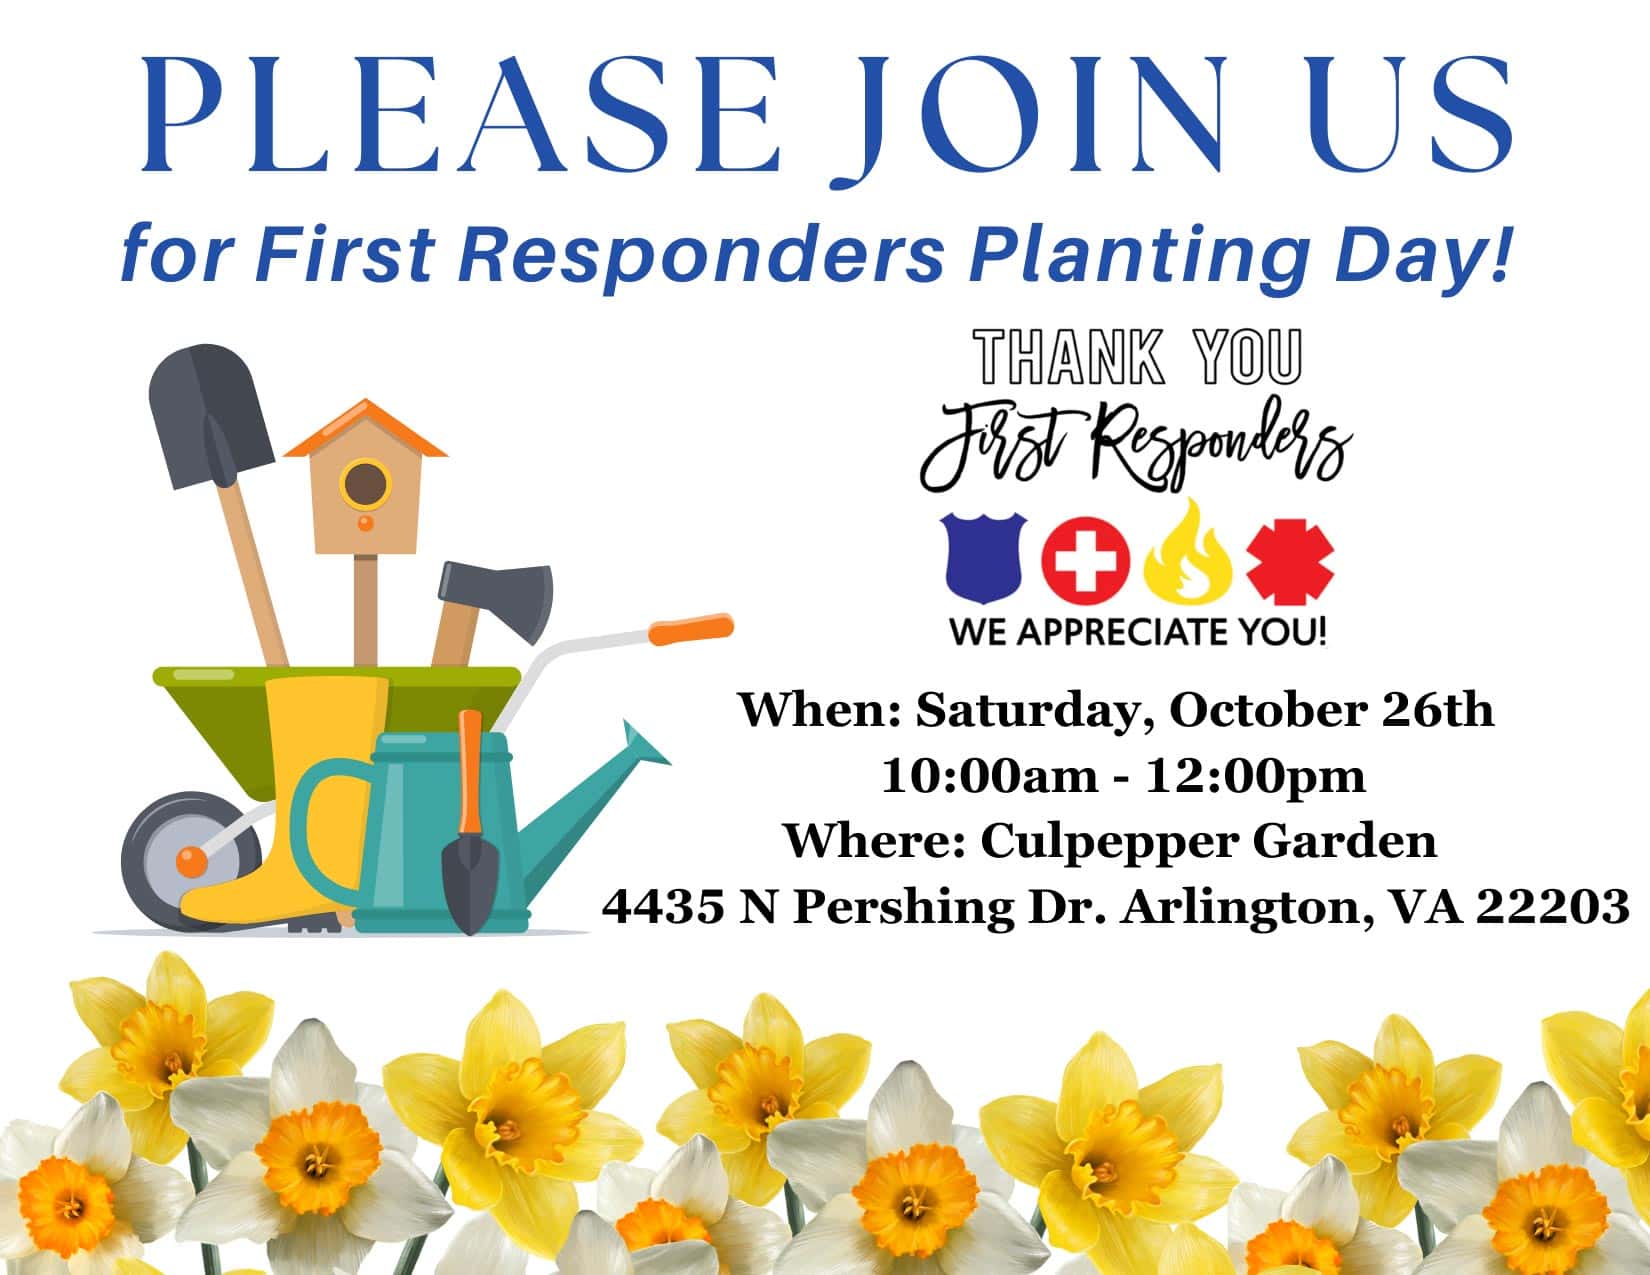 First Responders Planting Day Save the Date Card